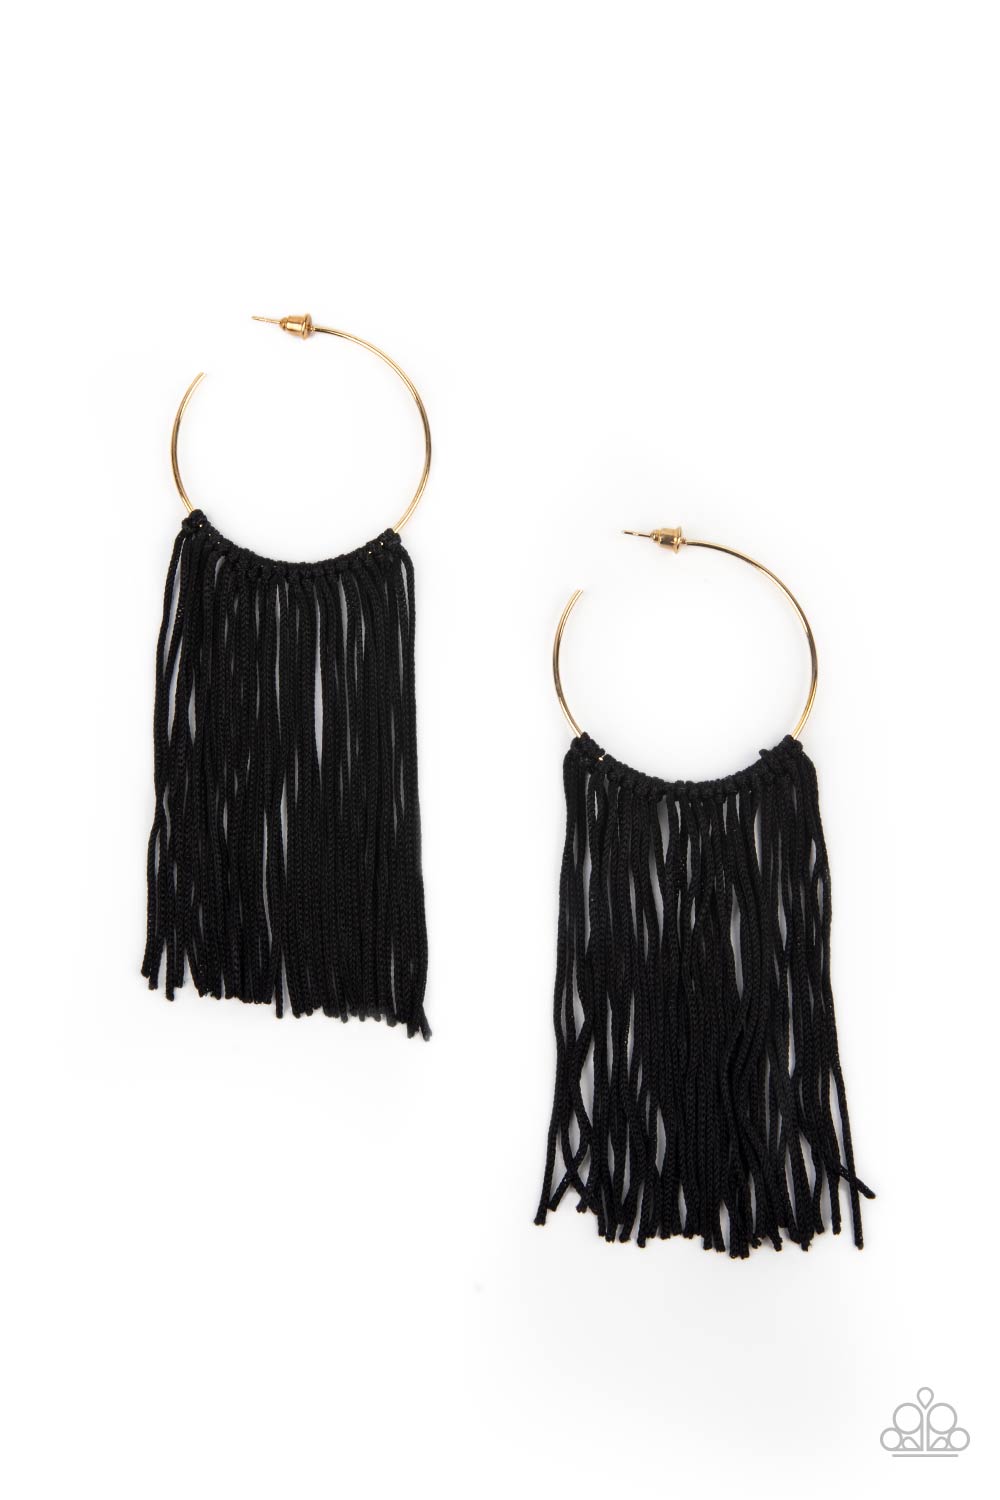 Flauntable Fringe Gold Hoop Earring - Paparazzi Accessories  A curtain of black cords stream from the center of a dainty gold hoop, creating a glamorous fringe. Earring attaches to a standard post fitting. Hoop measures approximately 1 3/4" in diameter.  All Paparazzi Accessories are lead free and nickel free!  Sold as one pair of hoop earrings.